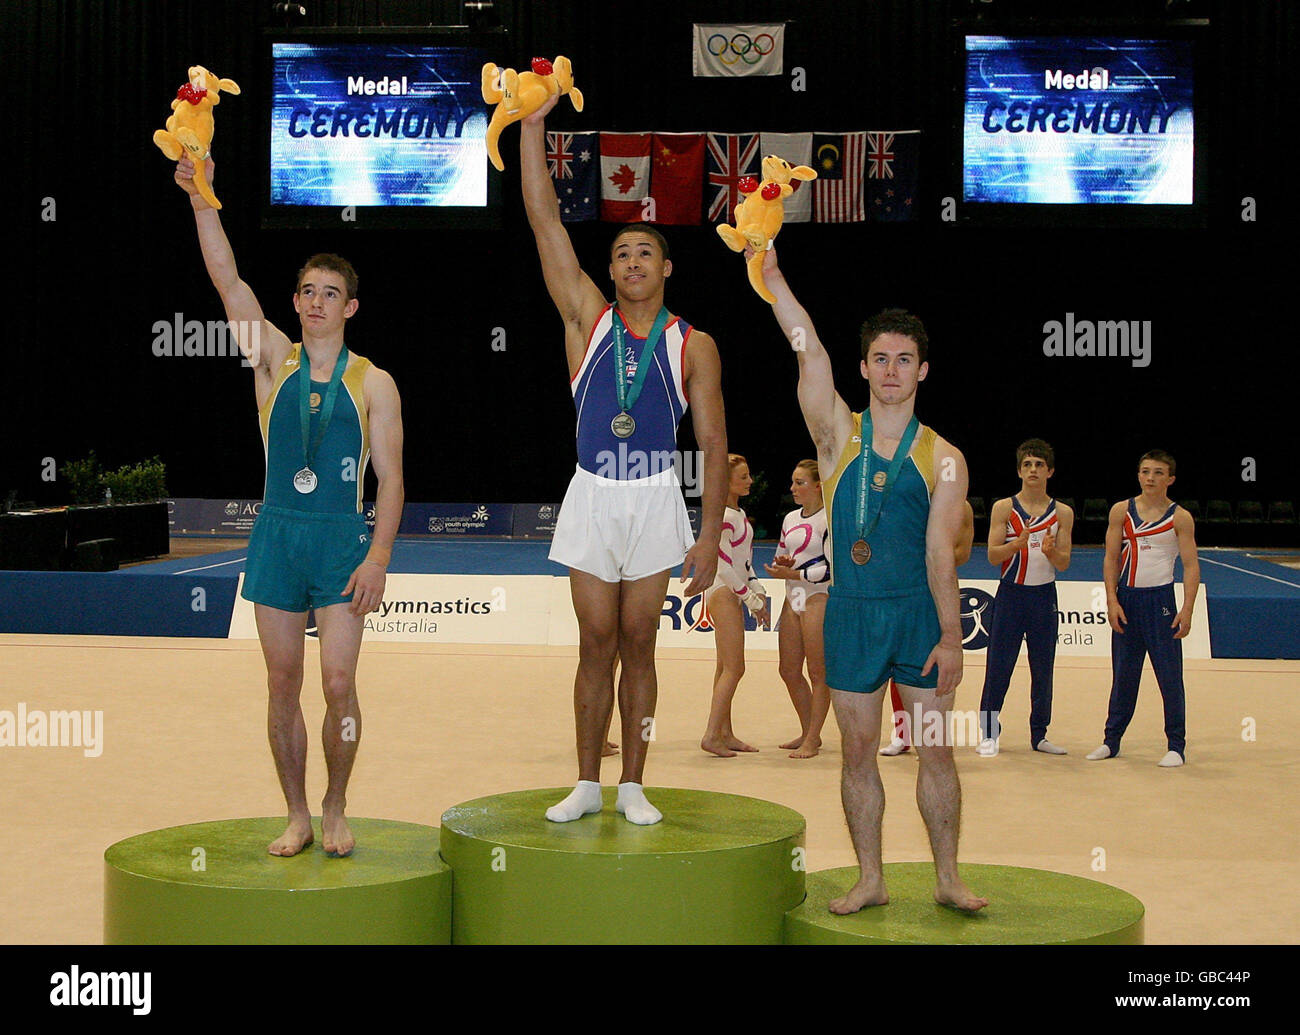 Great Britain Reiss Beckford wins gold in the Floor with Sean O'Hara (left), Silver and Luke Wadsworth (right) both of Australia in the Artistic Gymnastics Apparatus Final during the Australian Youth Olympic Festival 2009 at Sydney Olympic Park, Sydney, Australia. Stock Photo